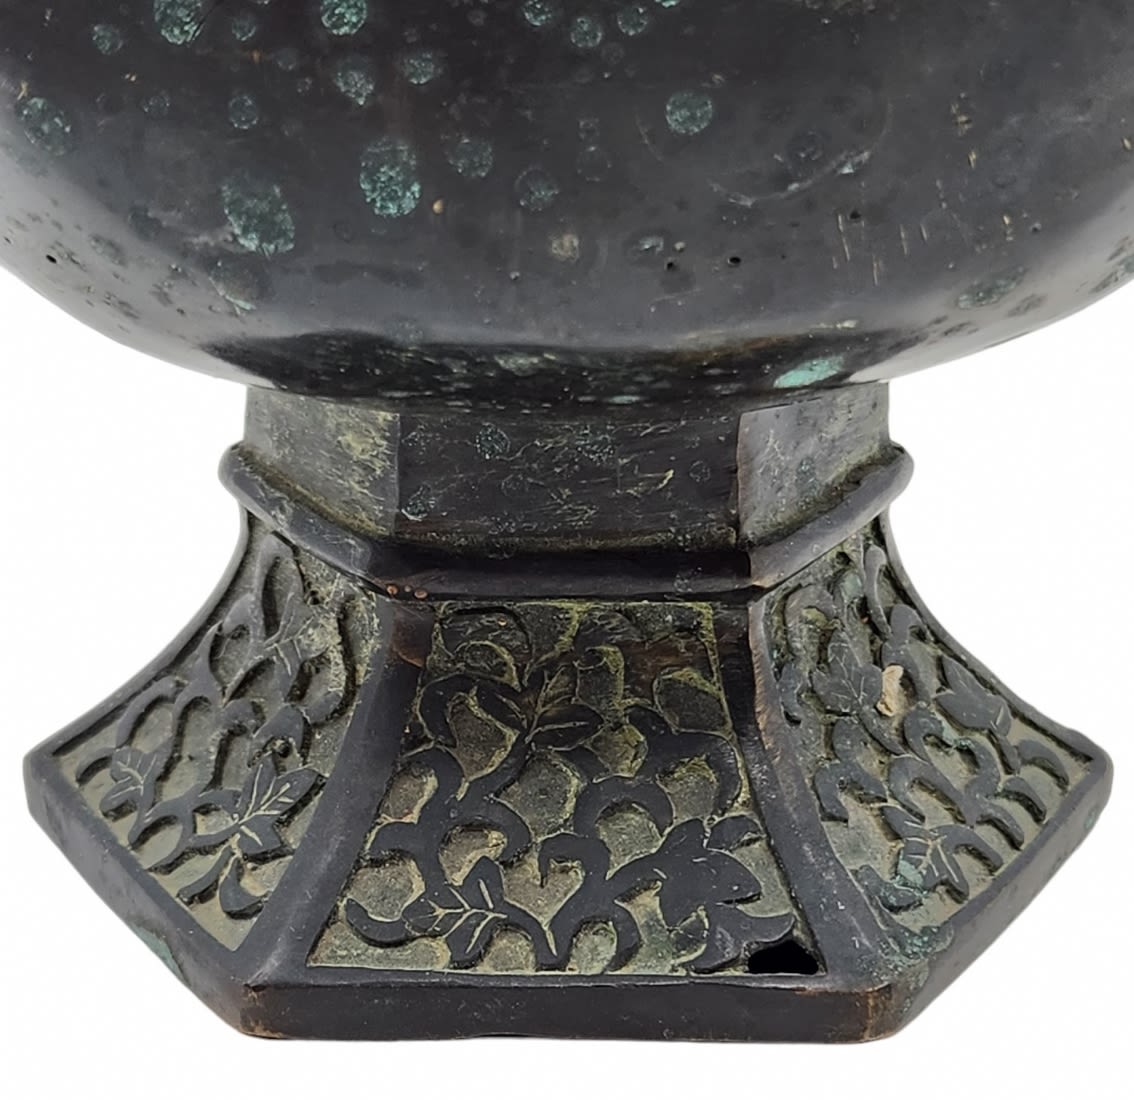 Chinese jug made of blackened brass, made in the style of ancient Indian jugs produced in the 17th - Image 4 of 5